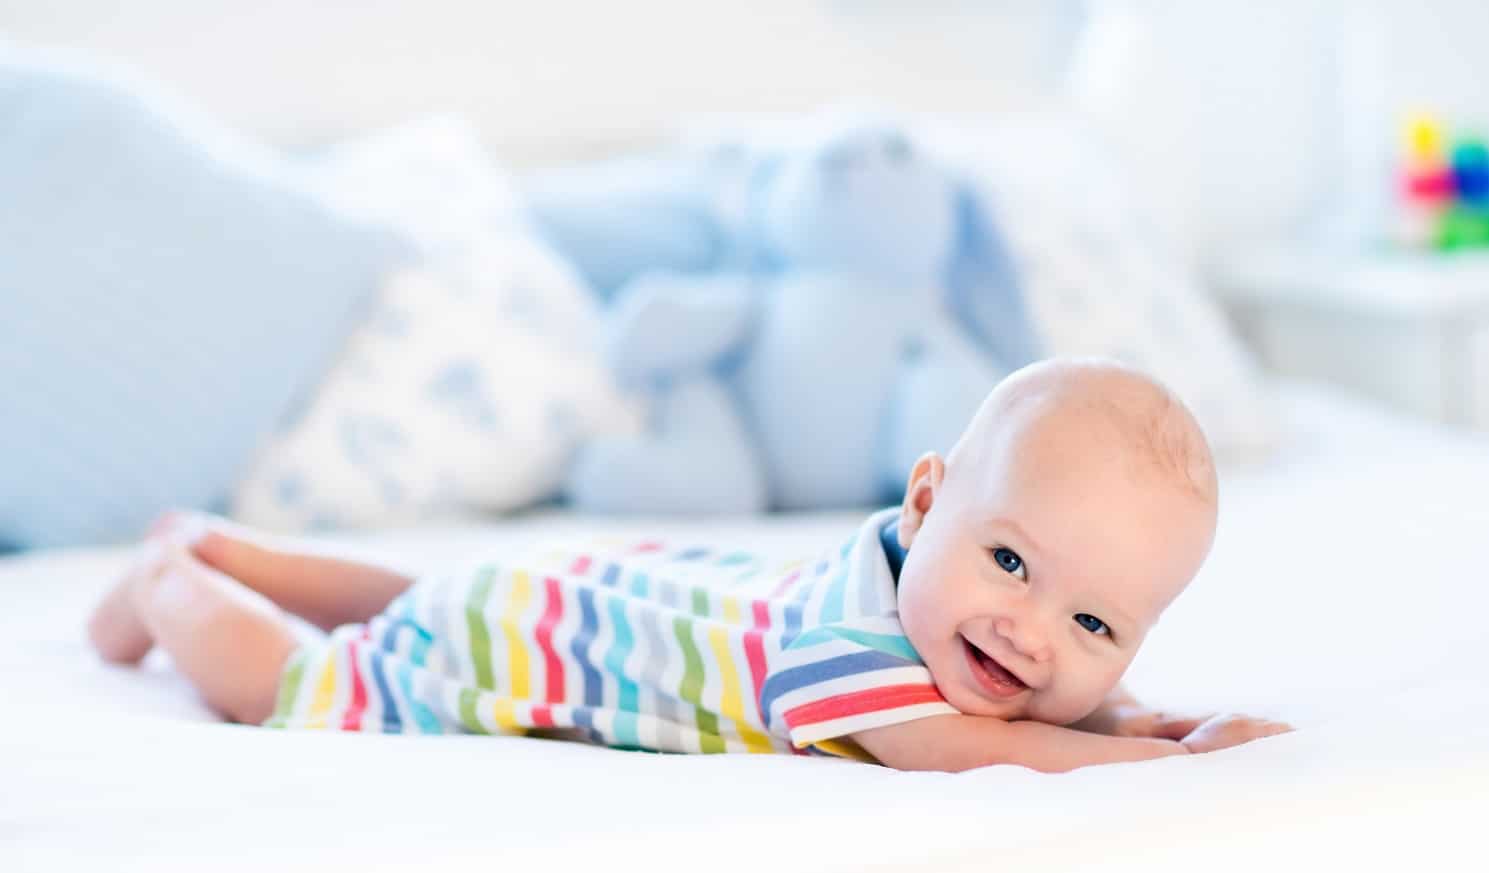 know the interesting reasons of babies smile during sleep - How Old Will My Baby Be When They Stop Wearing Baby Diapers?